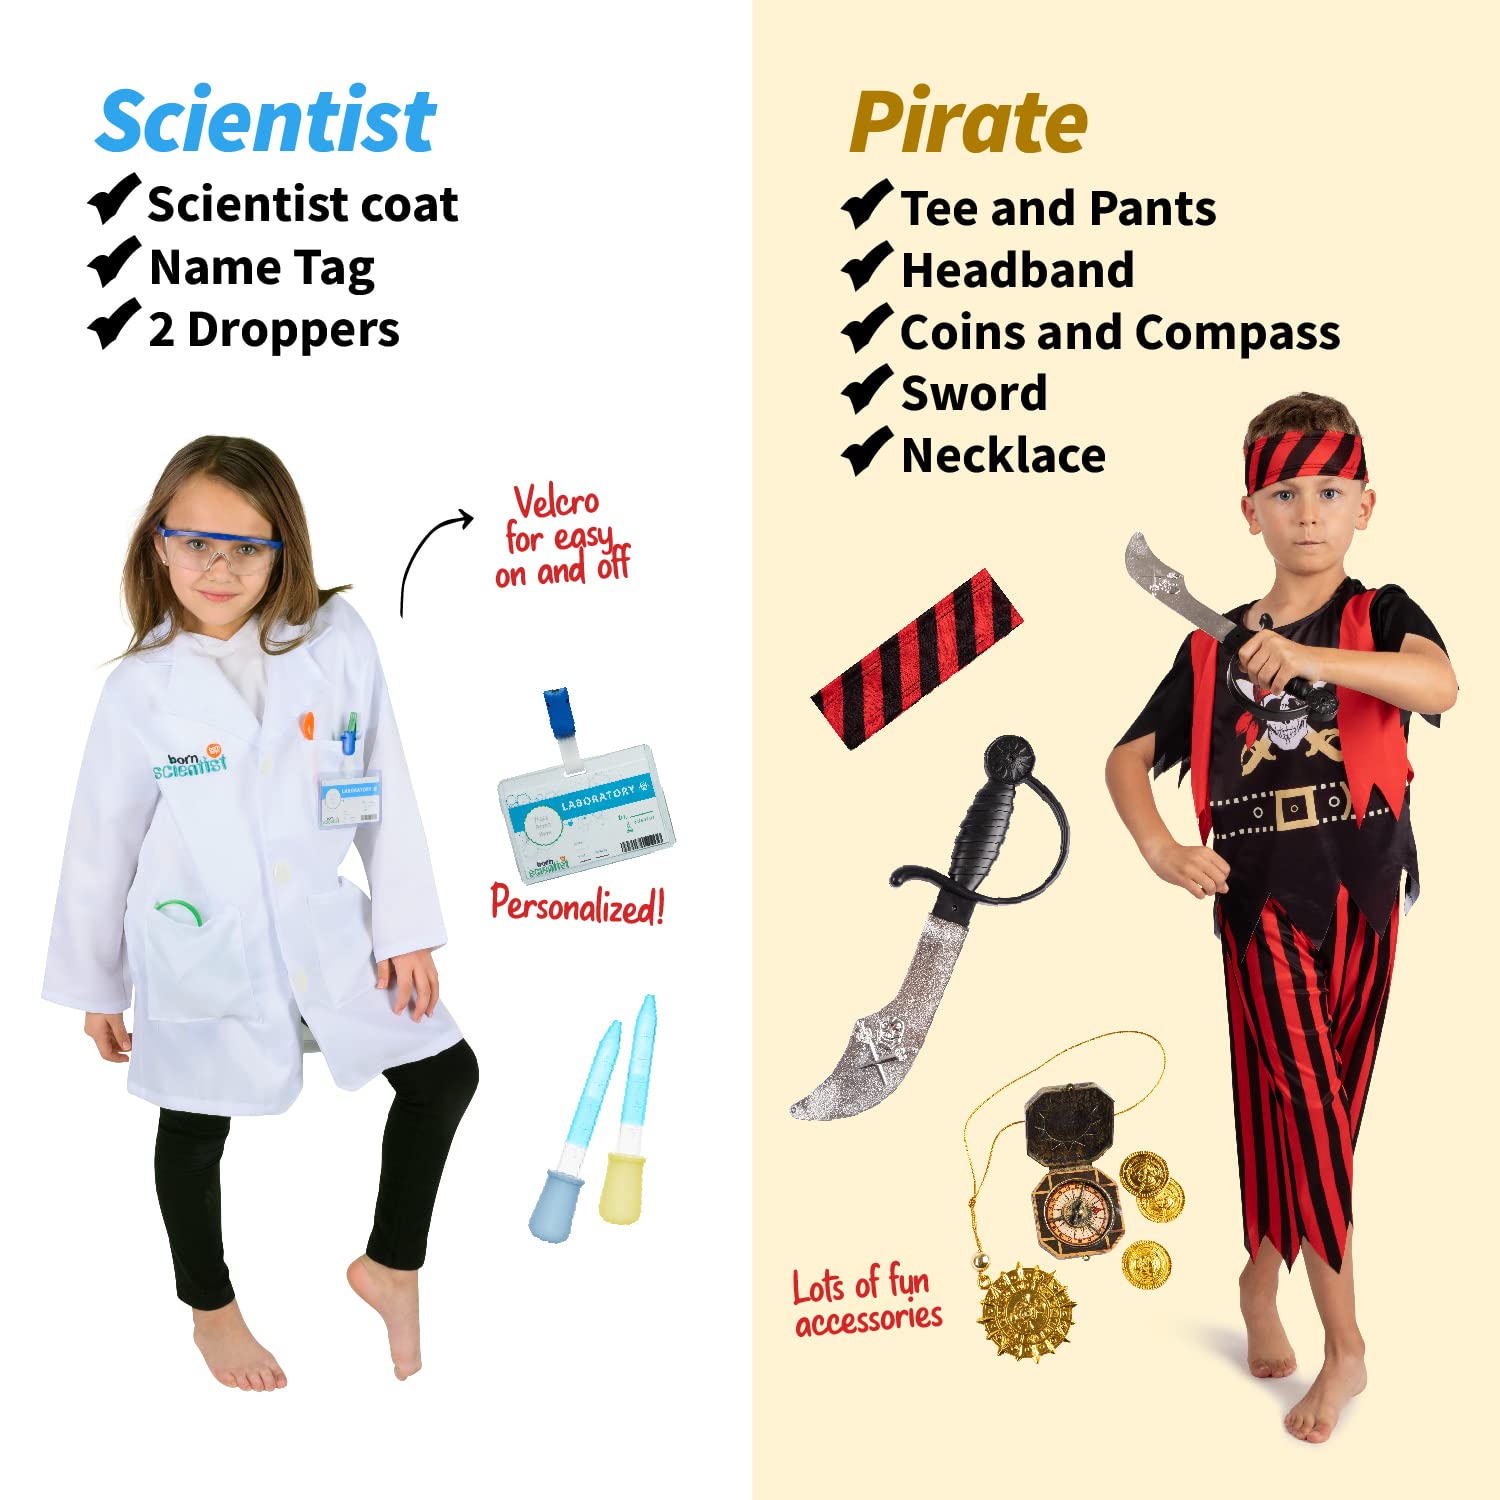 Born Toys 6-in-1 Kids' Dress Up & Pretend Play Firefighter, Astronaut, Scientist, Construction, Pirate, Office Set and Doctor Set